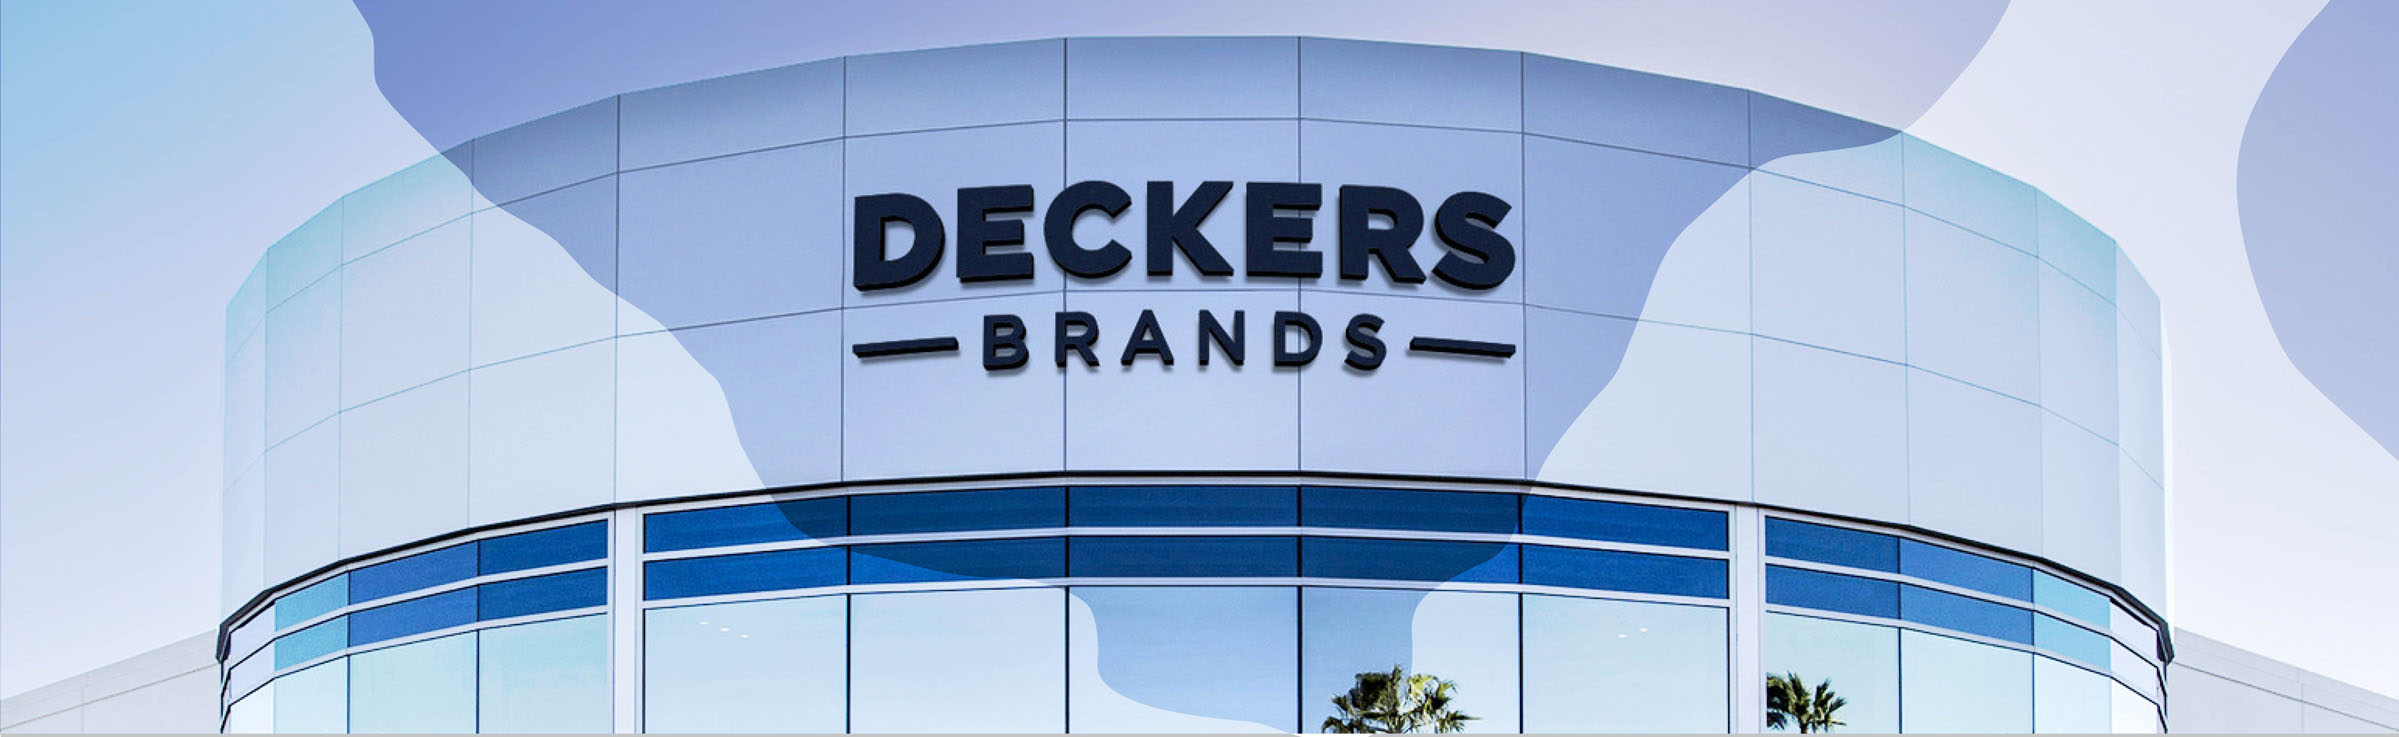 Deckers corporate headquarters outside view